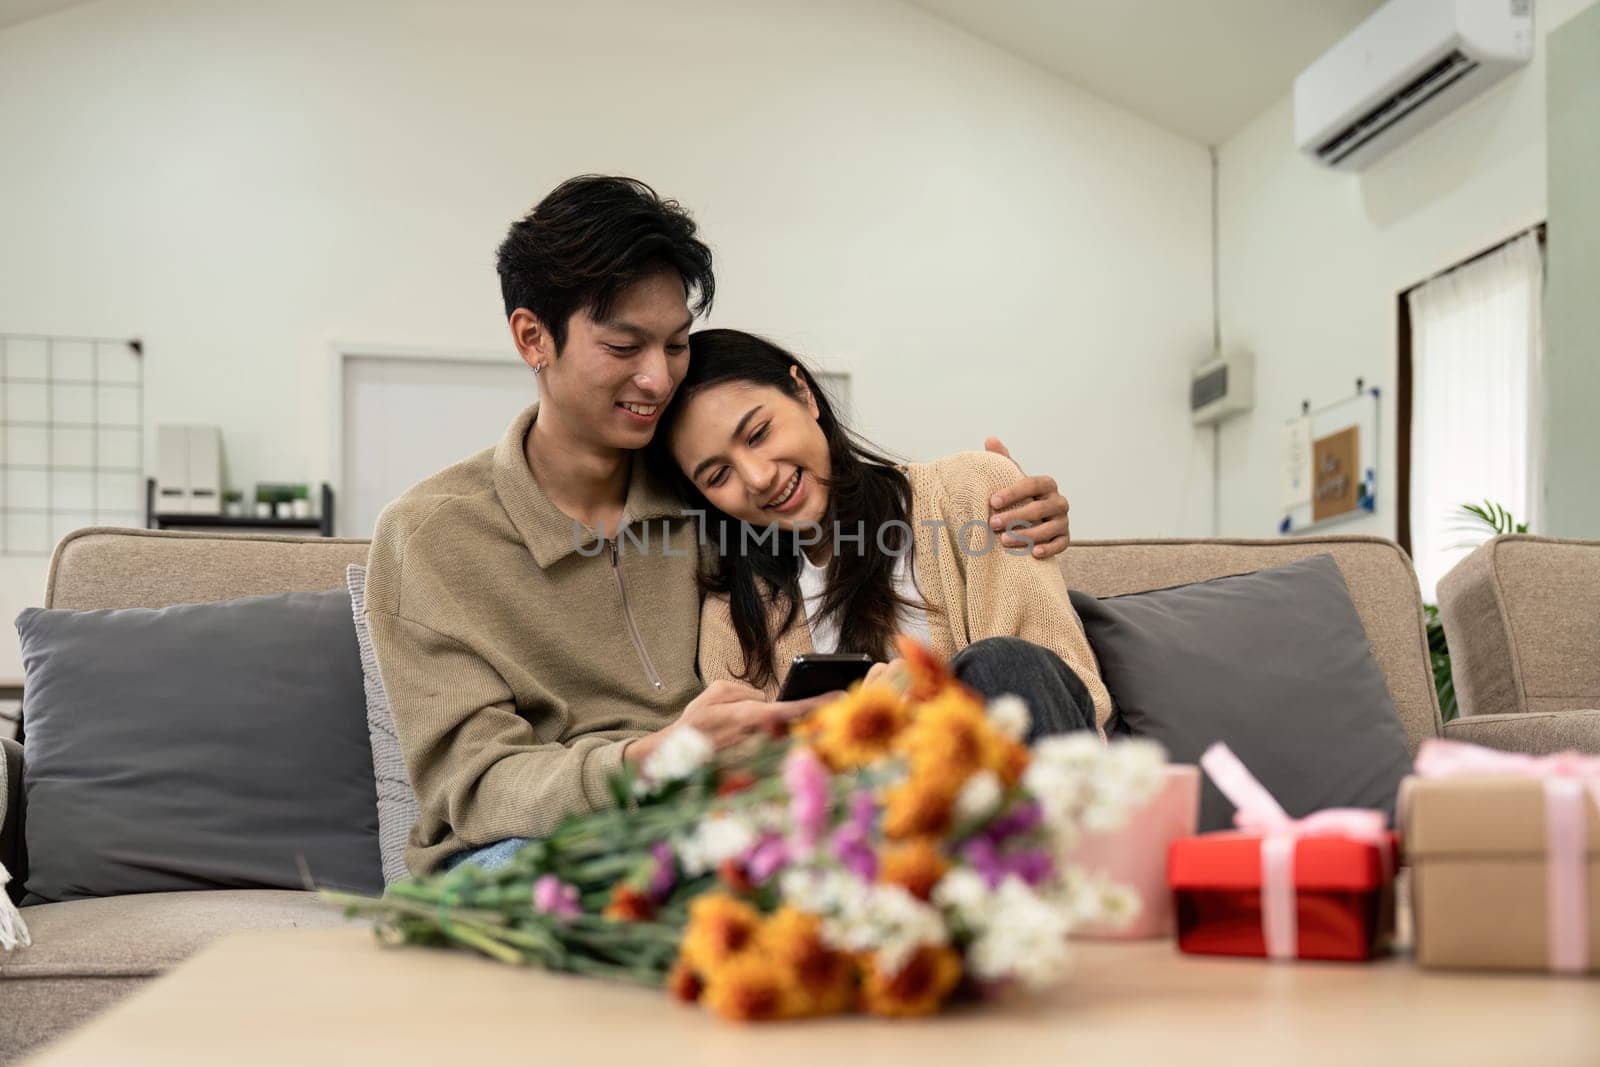 Asian couple lifestyle using phones, shopping or chatting online, sitting on couch at home, holding smartphones, enjoy leisure time. fall in love. Valentine concept.